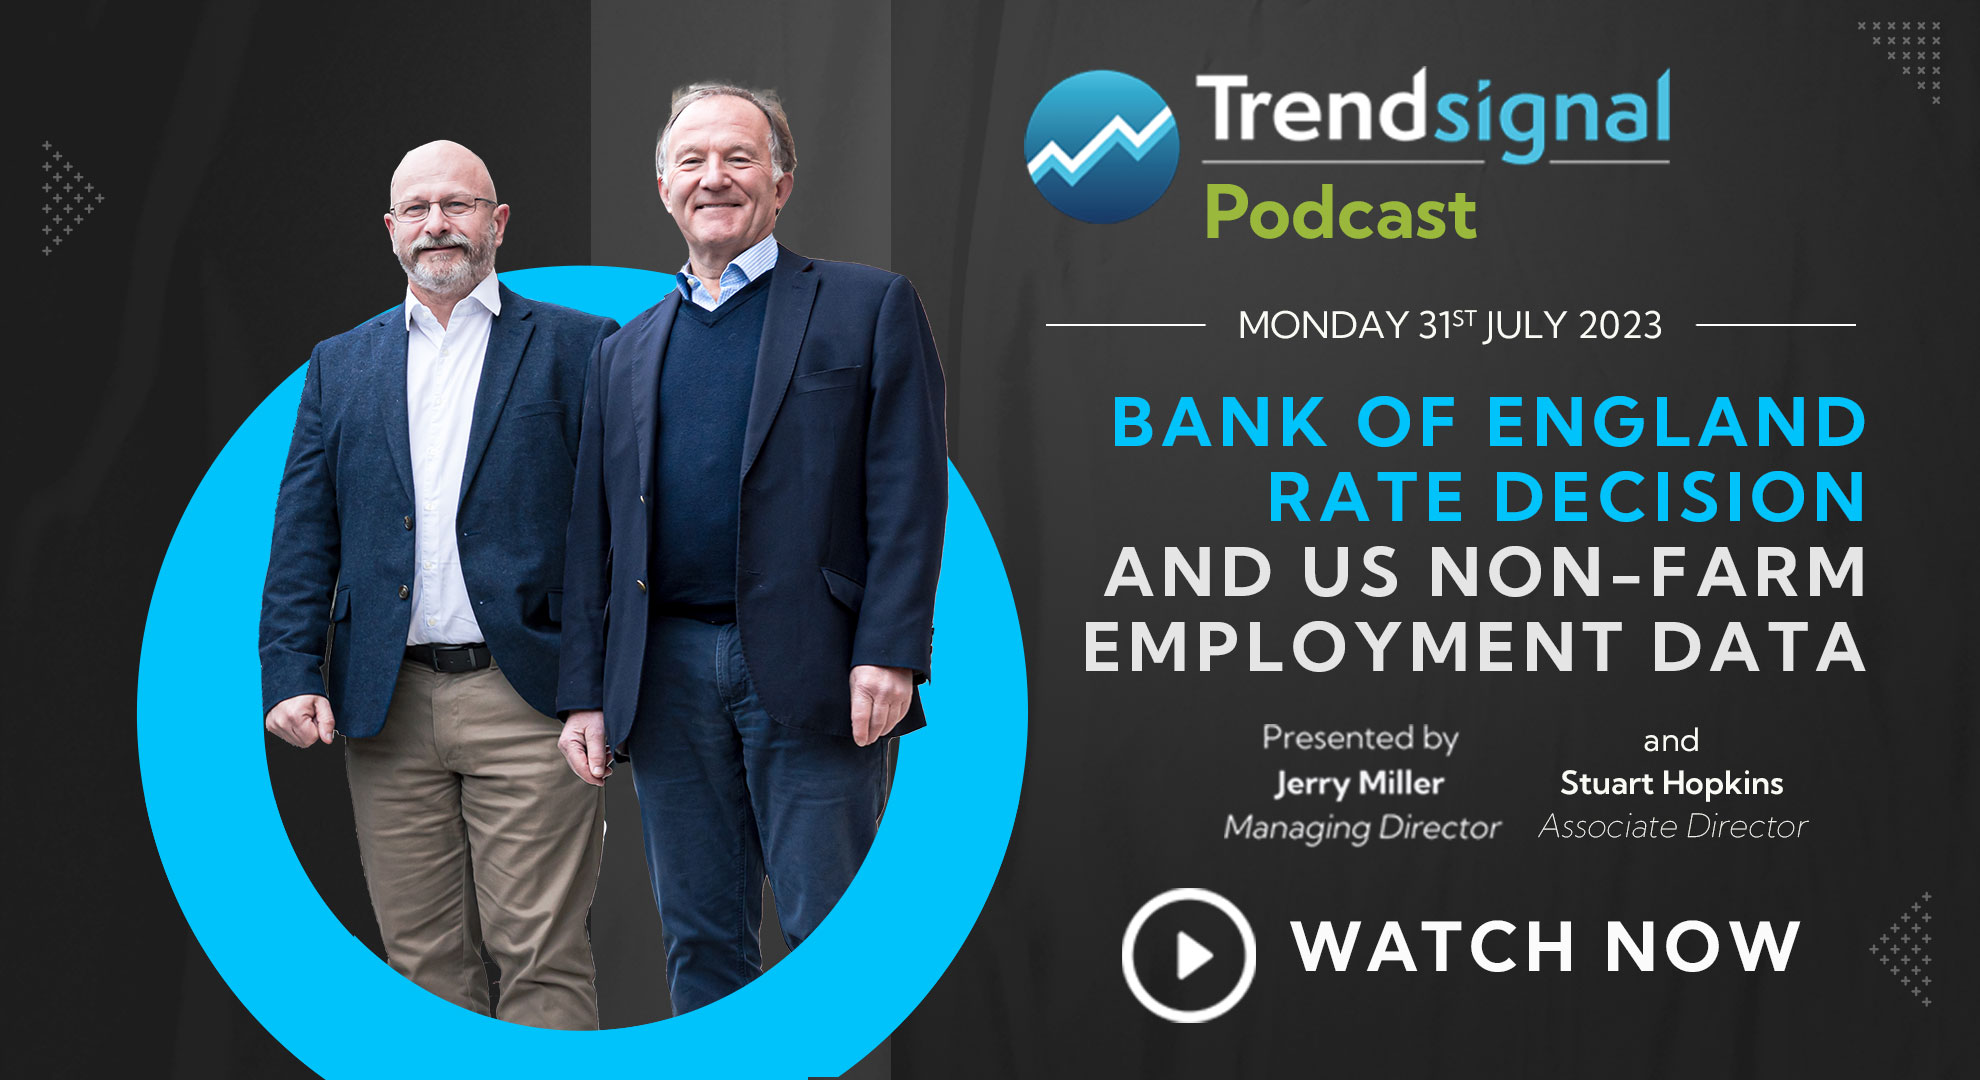 Podcast: Bank of England rate decision and US non-farm employment data